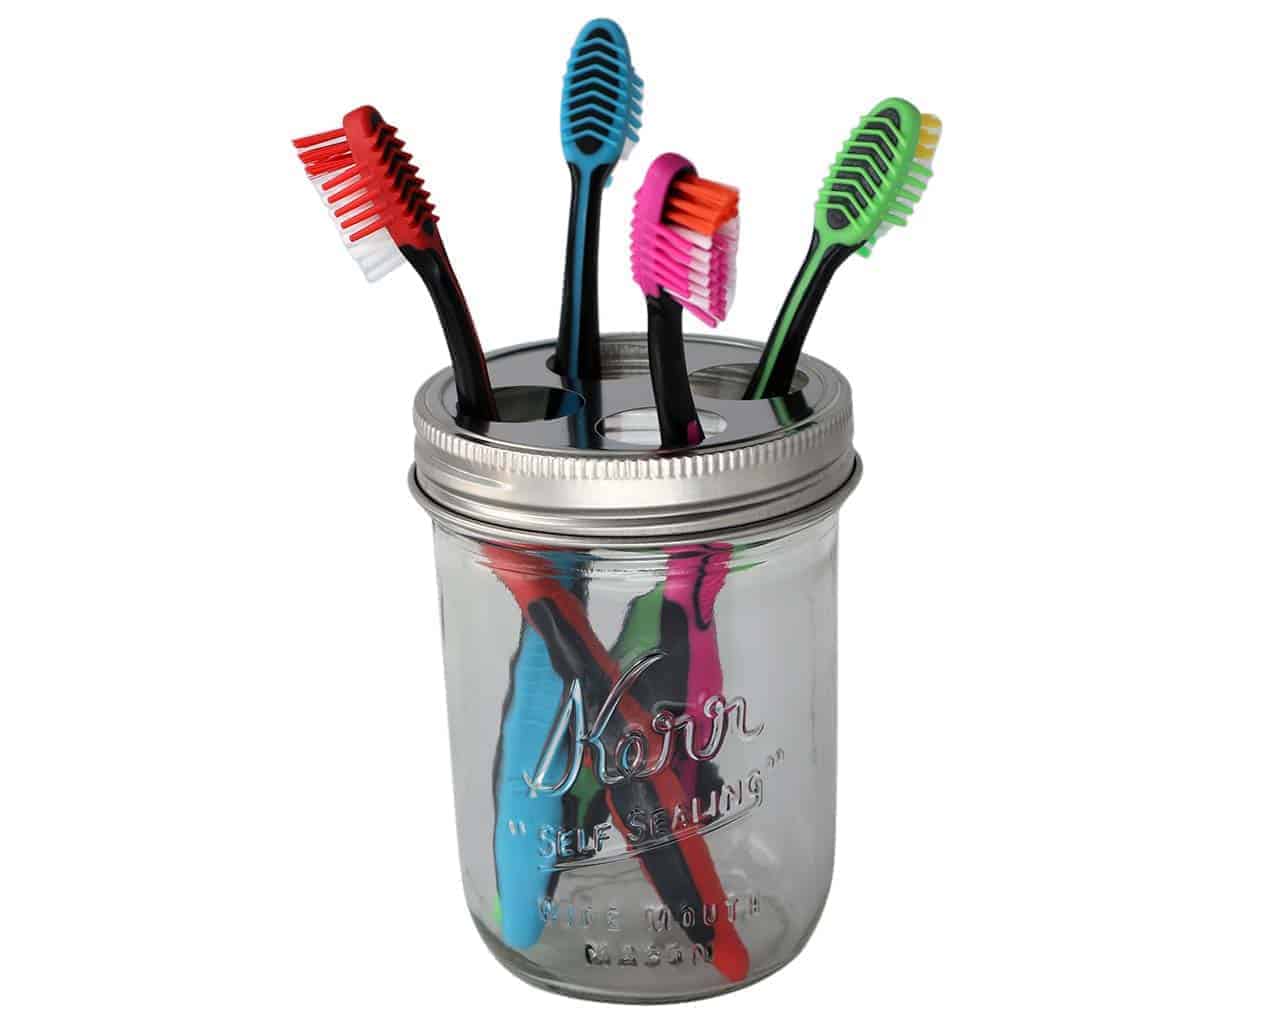 Toothbrush holder lid on wide mouth Kerr pint jar with toothbrushes